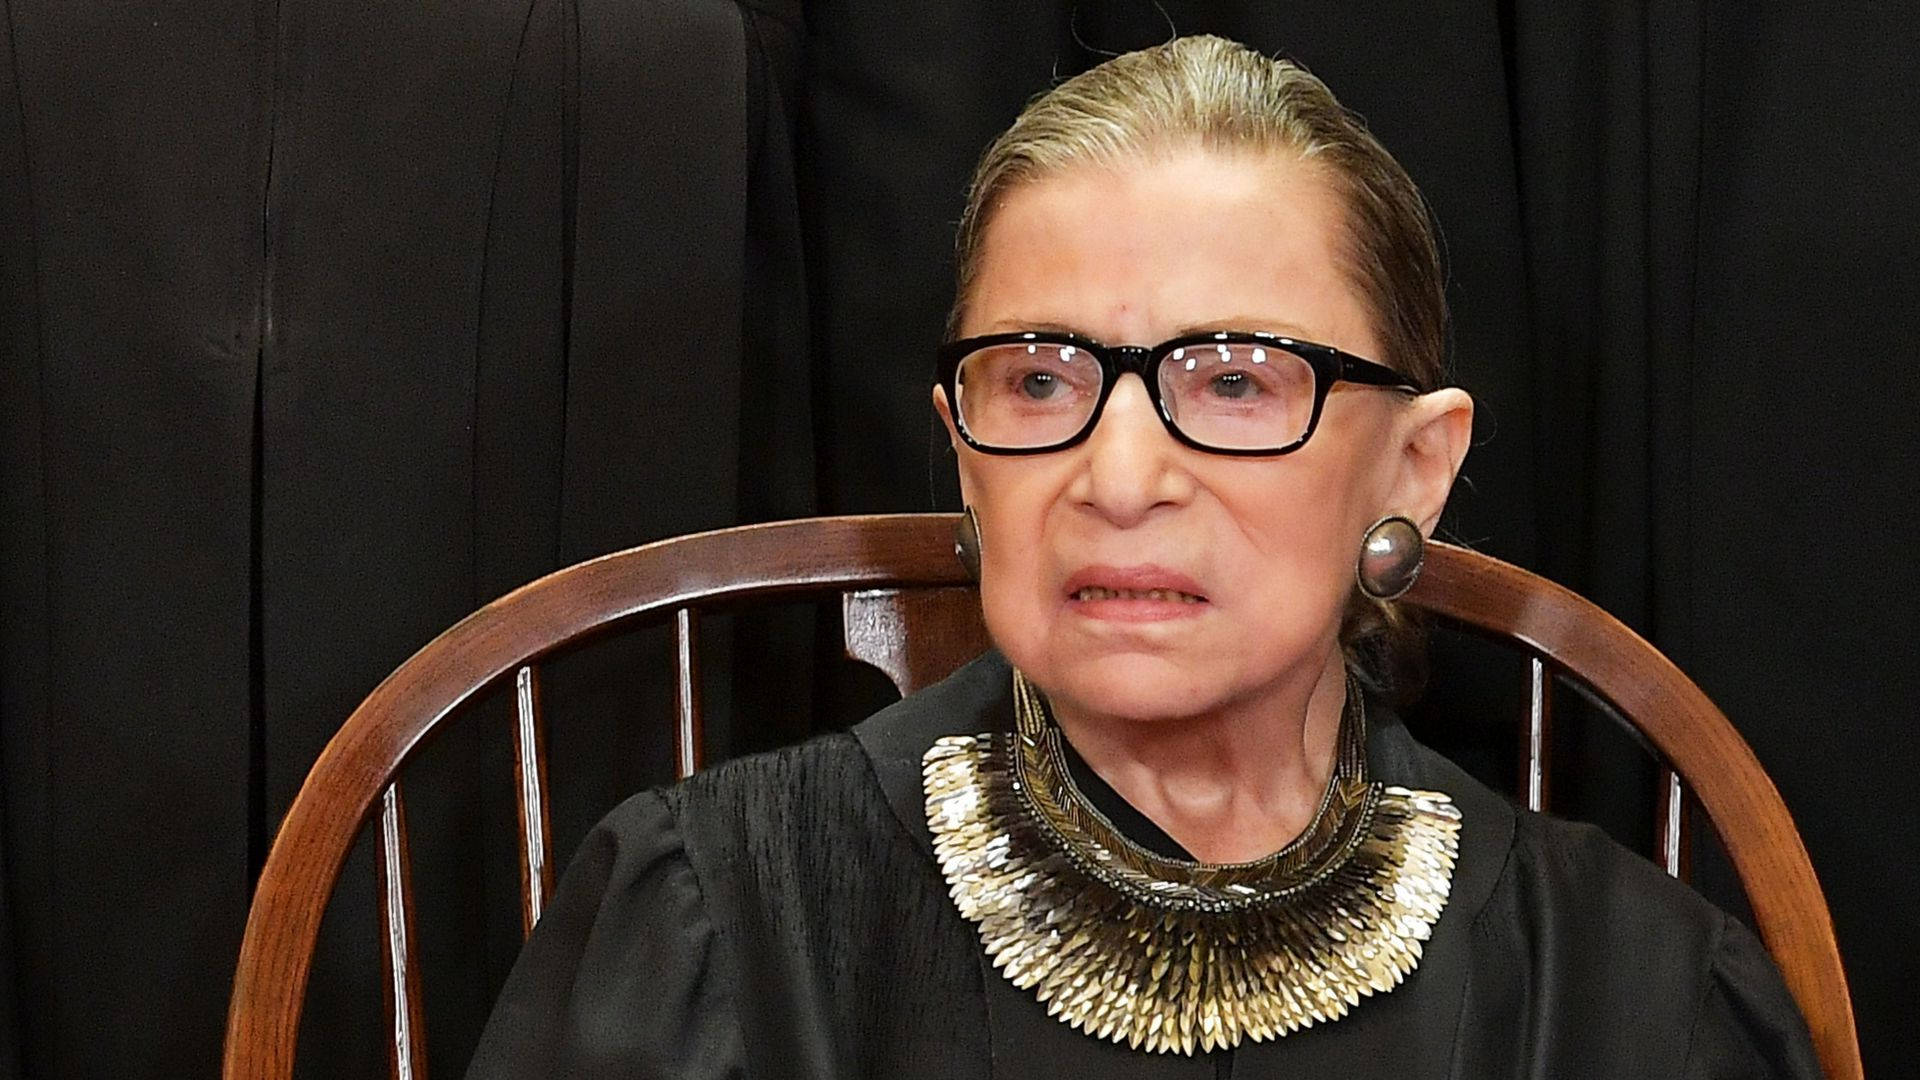 Ruth Bader Ginsburg Iconic Necklace